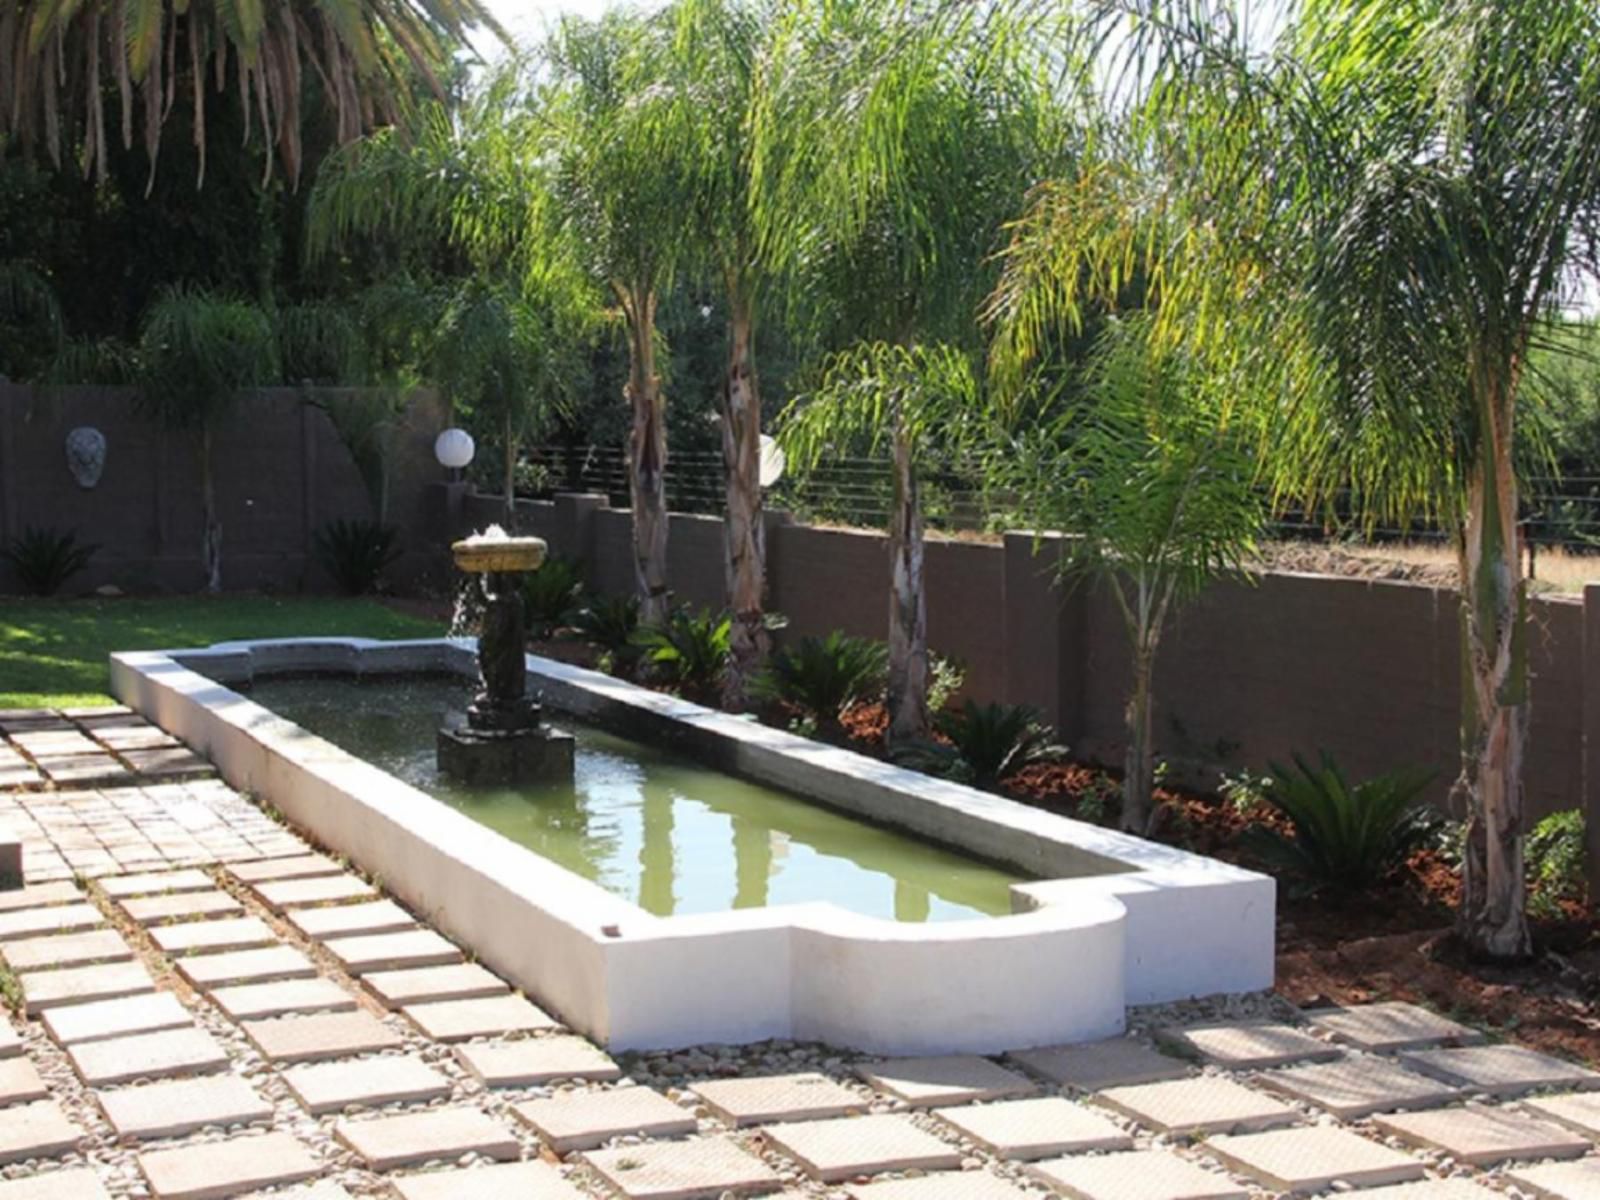 Allianto Boutique Hotel Keidebees Upington Northern Cape South Africa Palm Tree, Plant, Nature, Wood, Garden, Swimming Pool